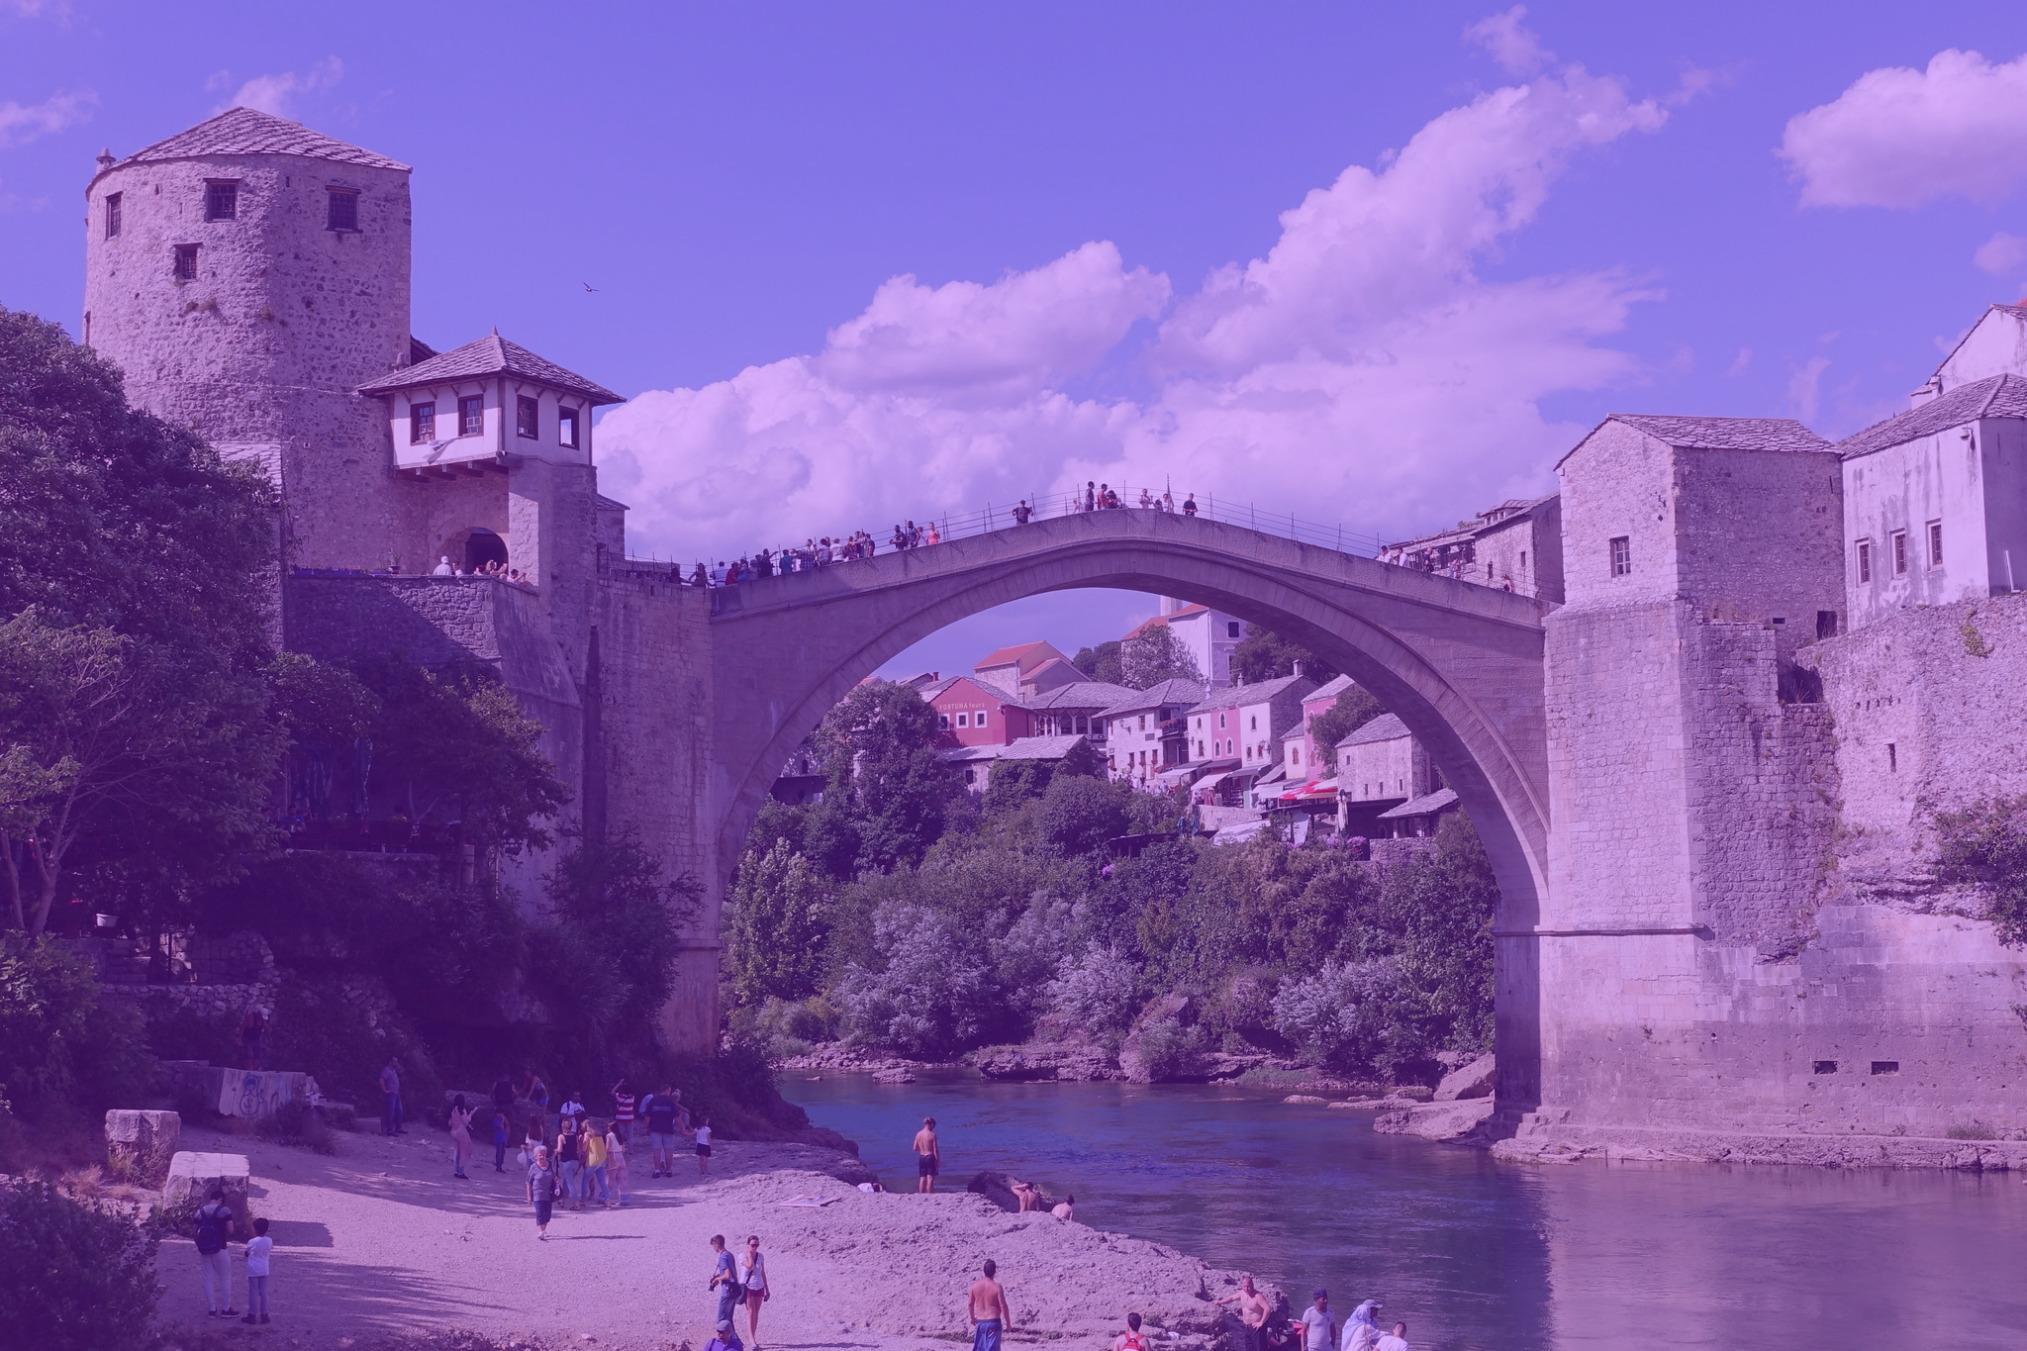 Photo: "Stari Most, Mostar", by David Jones licensed under CC BY 2.0. Hue modified from the original